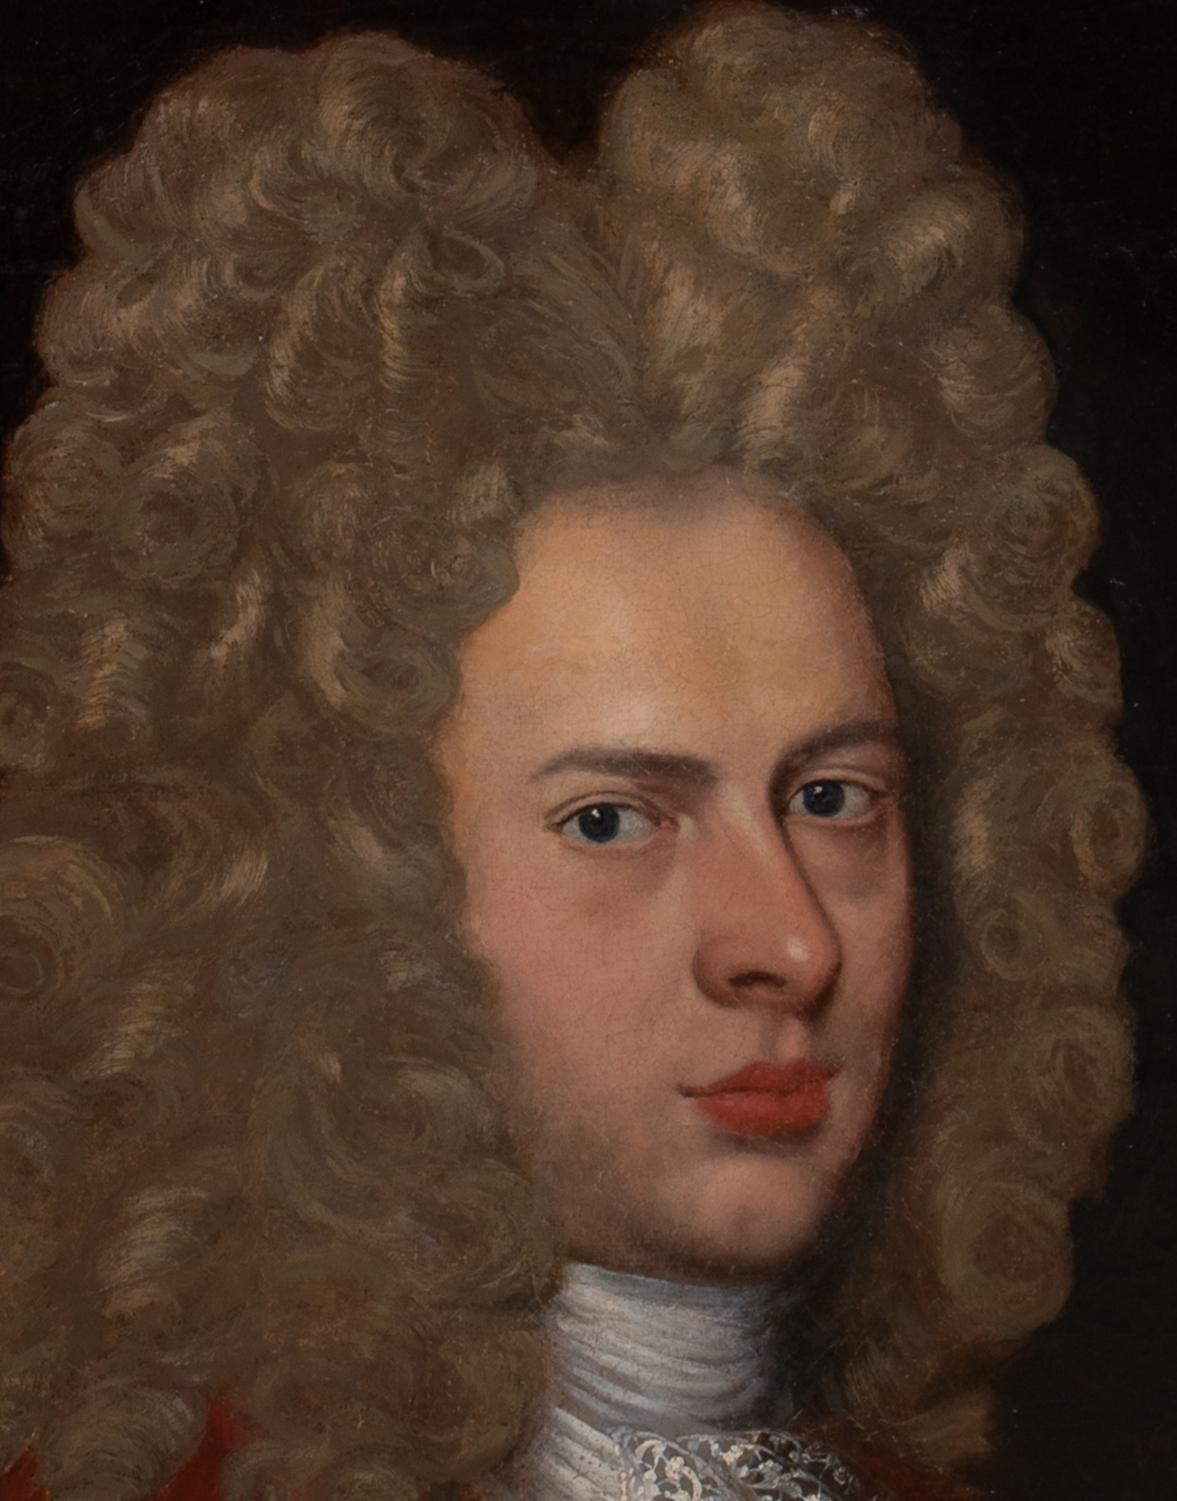 Portrait Of Thomas Paget, Governor Of Minorca, Marquess Of Anglesey, 18th Century

English School

Large 18th Century portrait of Thomas Paget, Governor of Minorca, Marquess of Anglesey, oil on canvas. Excellent quality and condition portrait of the